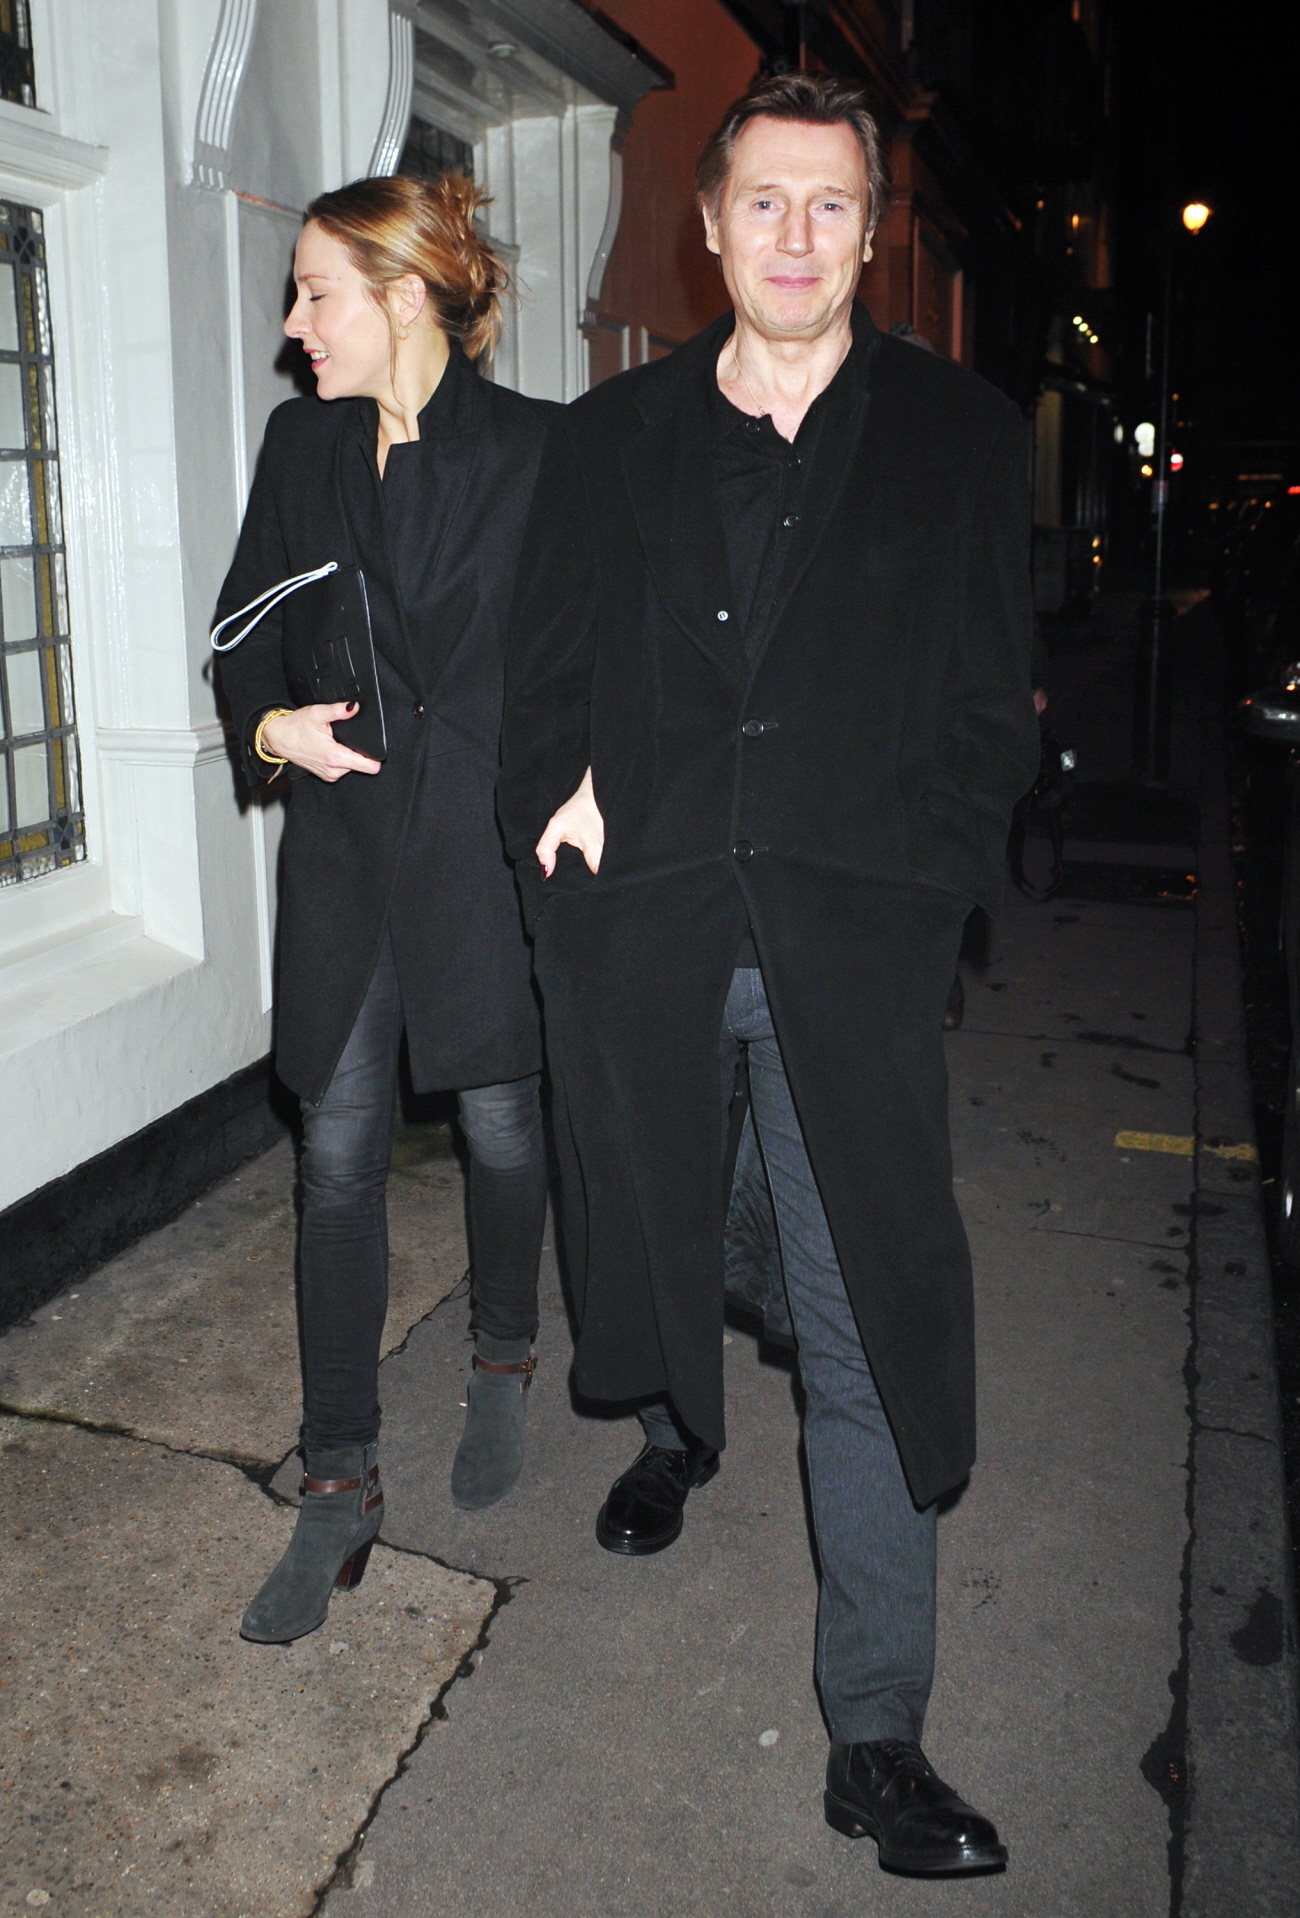 Liam Neeson steps out in London with his on-again girlfriend Freya St. John...